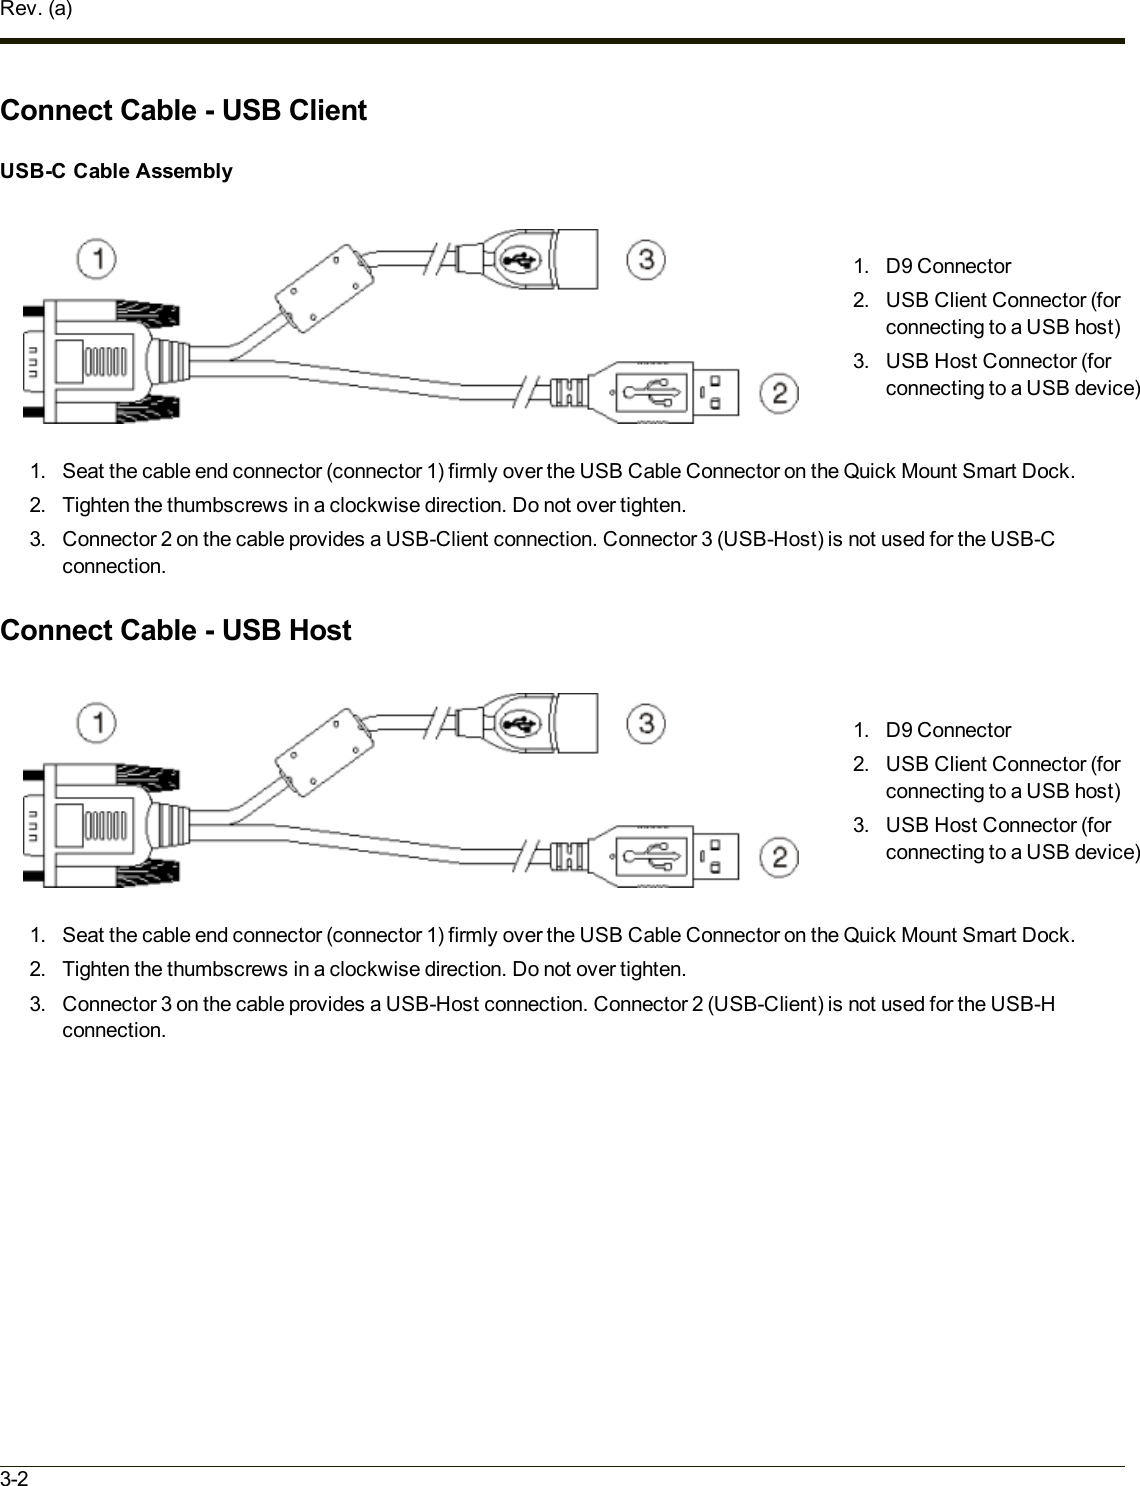 Rev. (a)Connect Cable - USB ClientUSB-C Cable Assembly1. D9 Connector2. USB Client Connector (forconnecting to a USB host)3. USB Host Connector (forconnecting to a USB device)1. Seat the cable end connector (connector 1) firmly over the USB Cable Connector on the Quick Mount Smart Dock.2. Tighten the thumbscrews in a clockwise direction. Do not over tighten.3. Connector 2 on the cable provides a USB-Client connection. Connector 3 (USB-Host) is not used for the USB-Cconnection.Connect Cable - USB Host1. D9 Connector2. USB Client Connector (forconnecting to a USB host)3. USB Host Connector (forconnecting to a USB device)1. Seat the cable end connector (connector 1) firmly over the USB Cable Connector on the Quick Mount Smart Dock.2. Tighten the thumbscrews in a clockwise direction. Do not over tighten.3. Connector 3 on the cable provides a USB-Host connection. Connector 2 (USB-Client) is not used for the USB-Hconnection.3-2